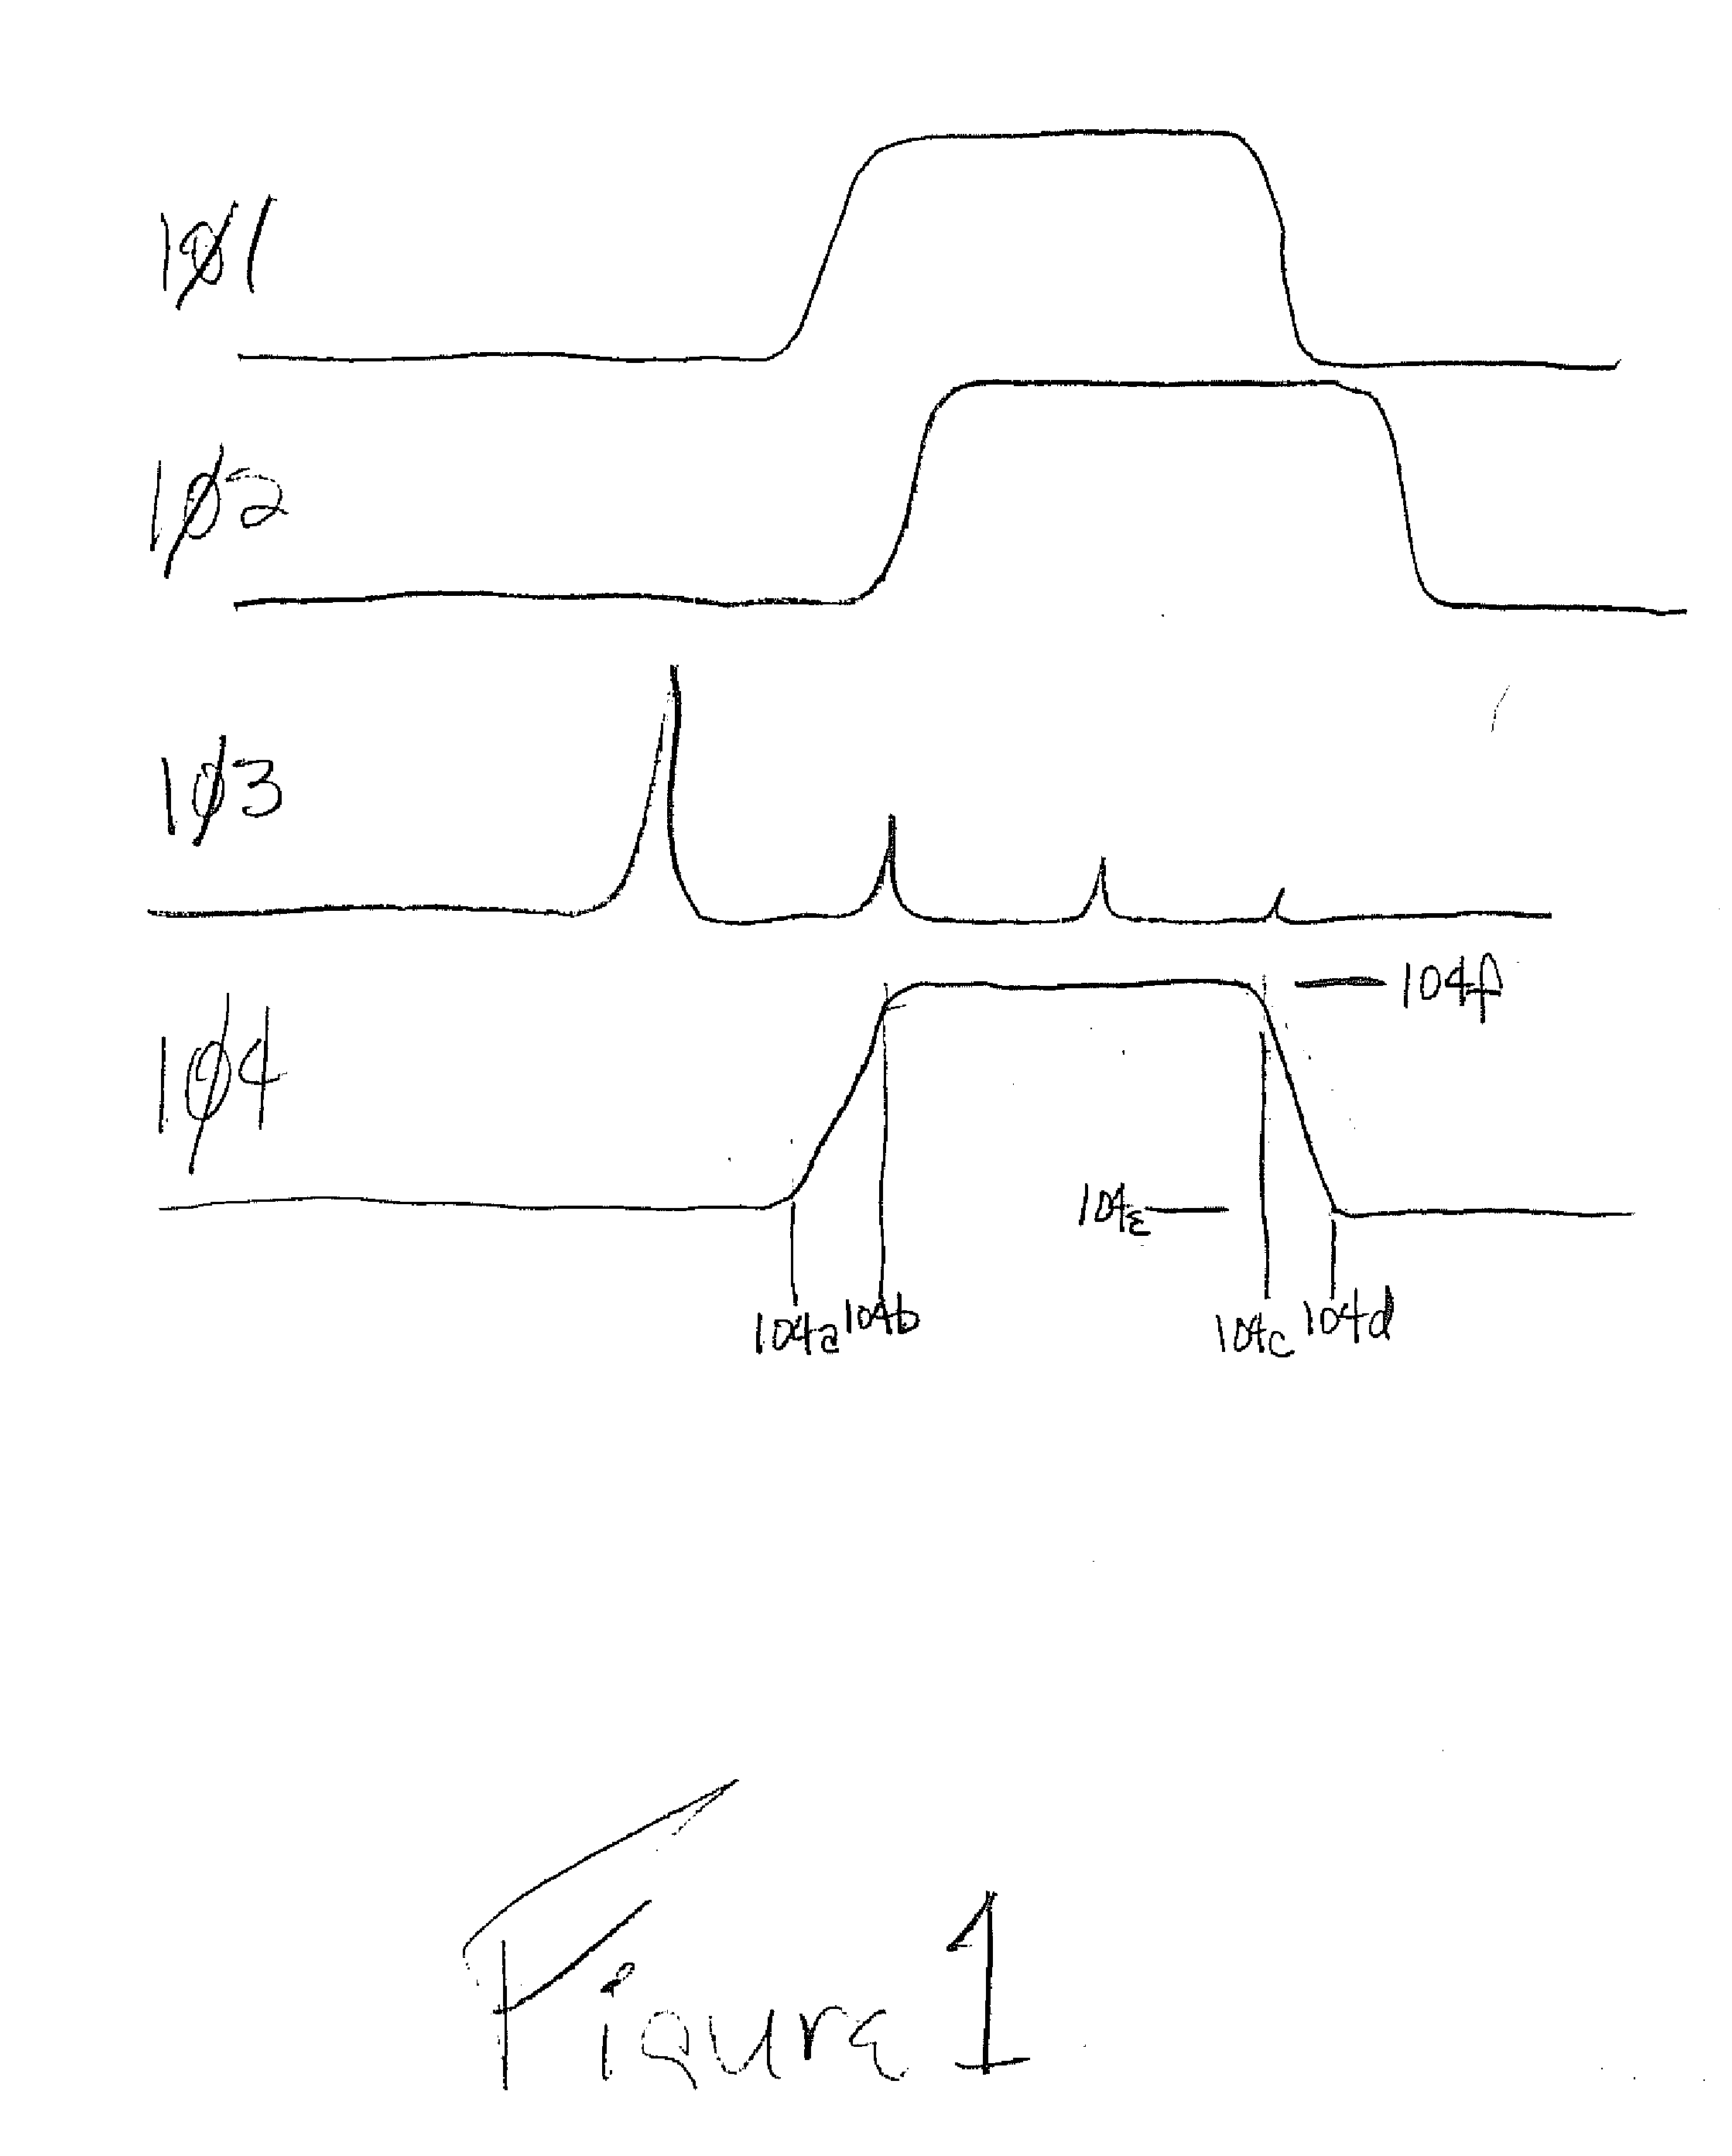 Acoustic myography system and methods